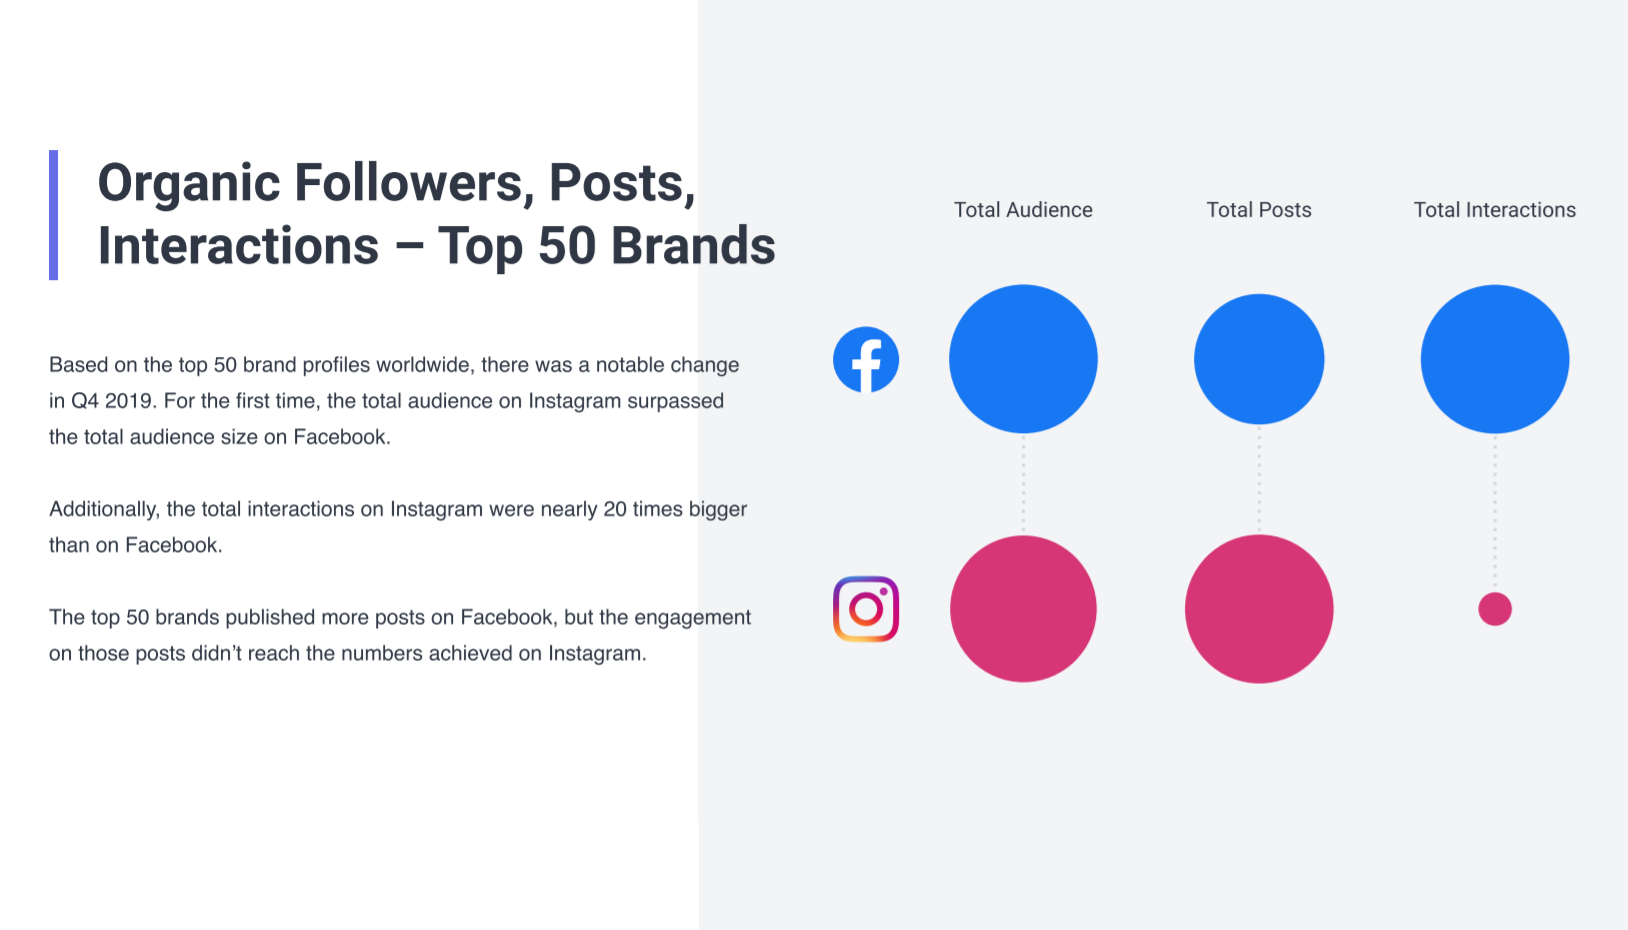 New Report Claims Instagram Now Attracts a Larger Audience Than Facebook Among Top Brands